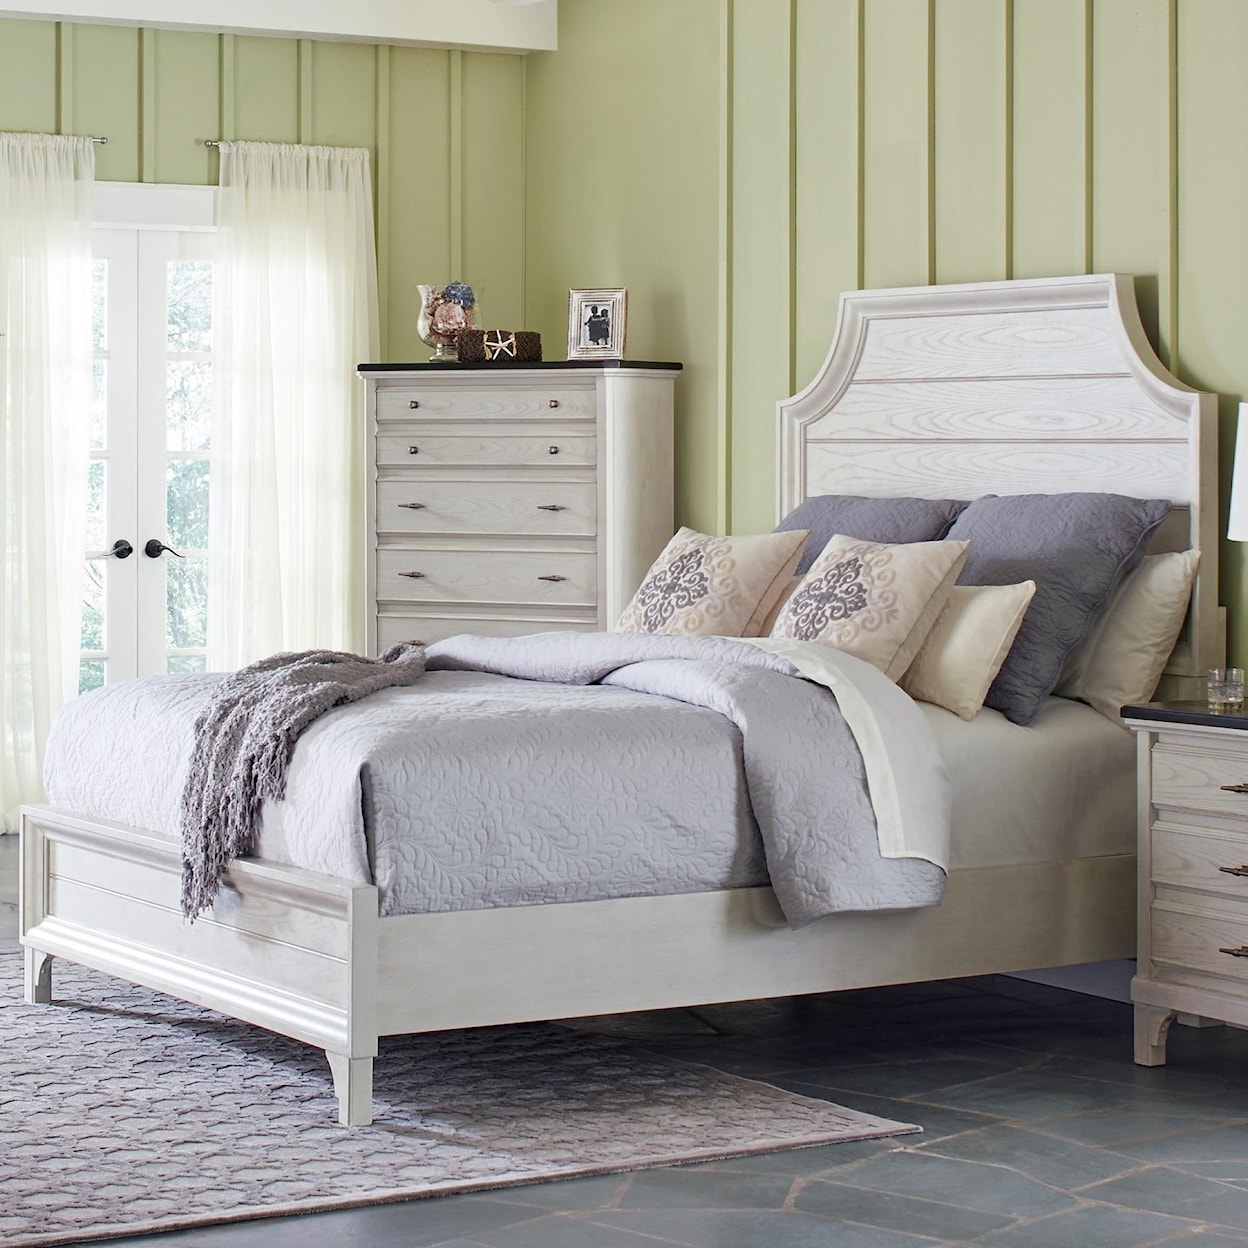 Avalon Furniture Mystic Cay Queen Bed